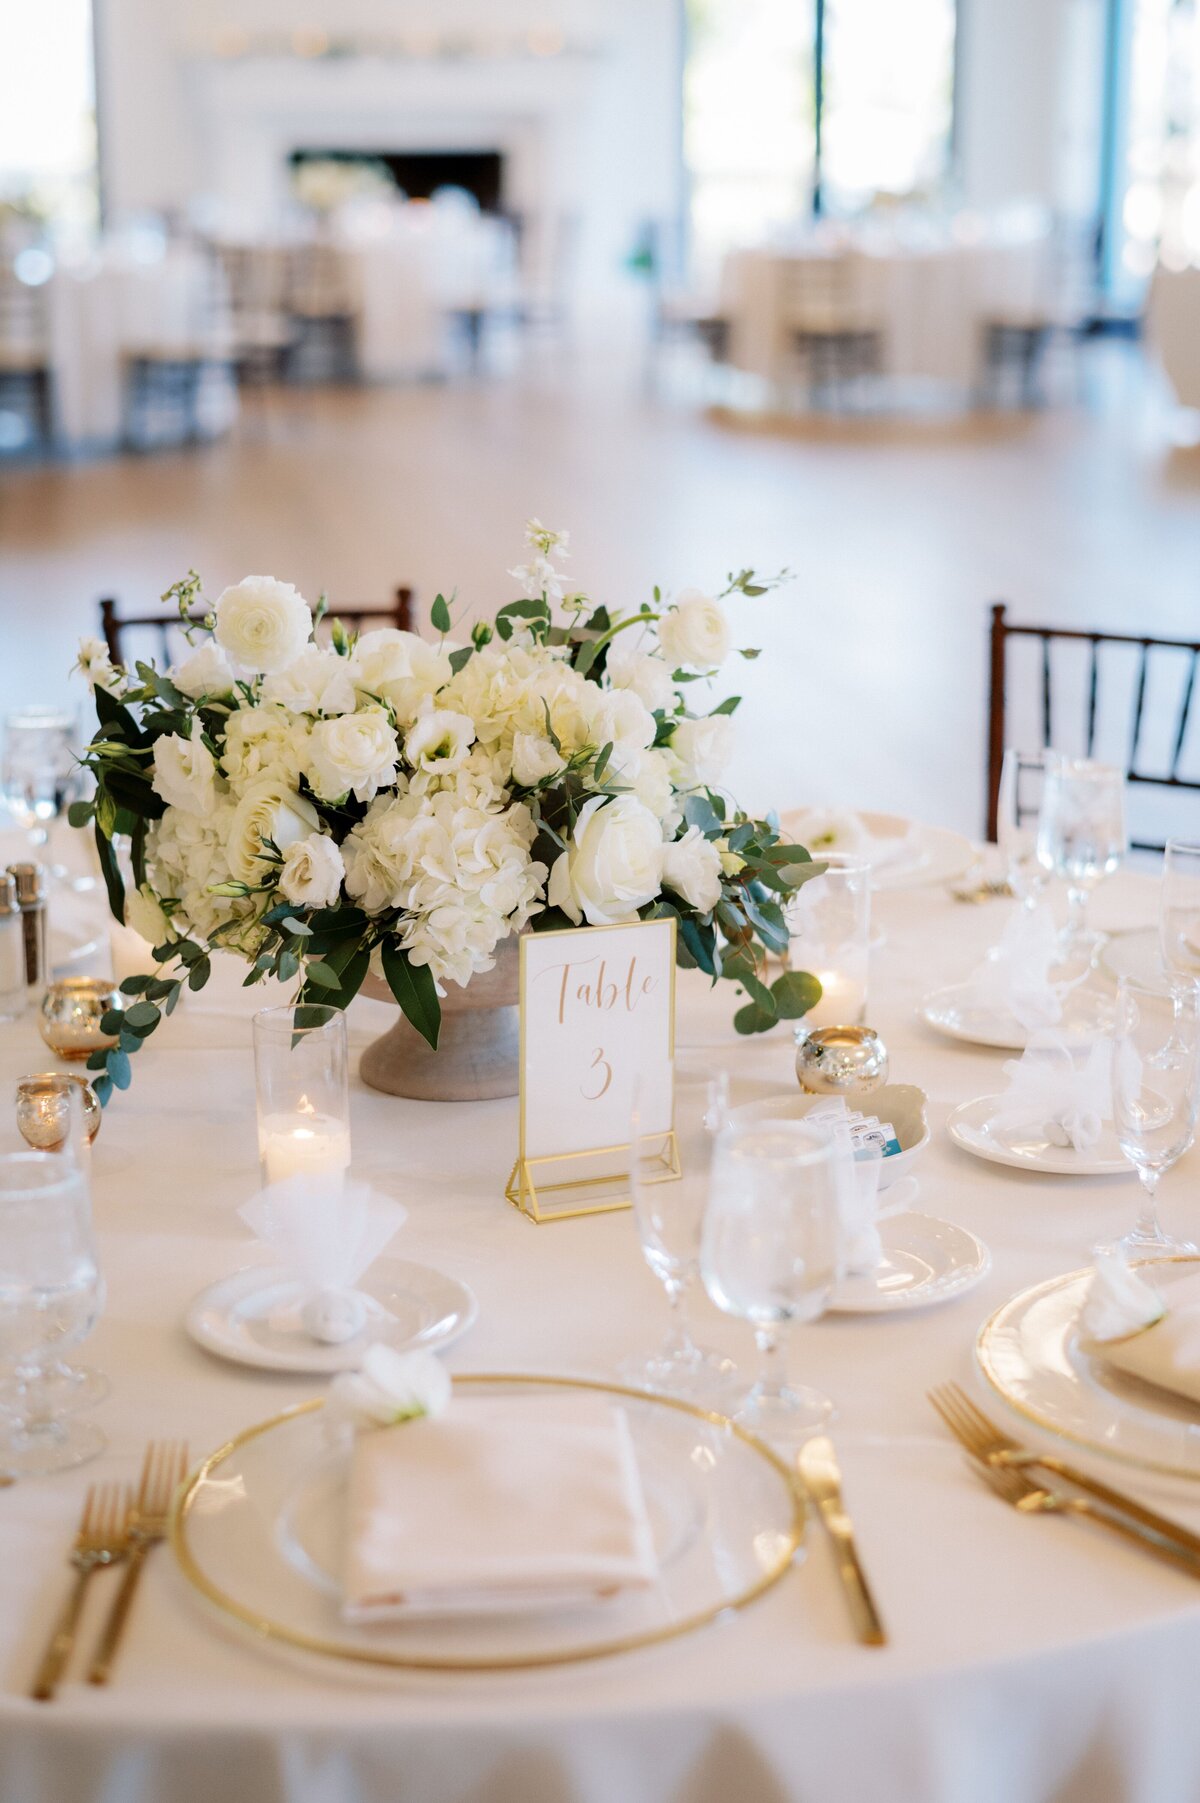 A white bouquet on a wedding table for guests.